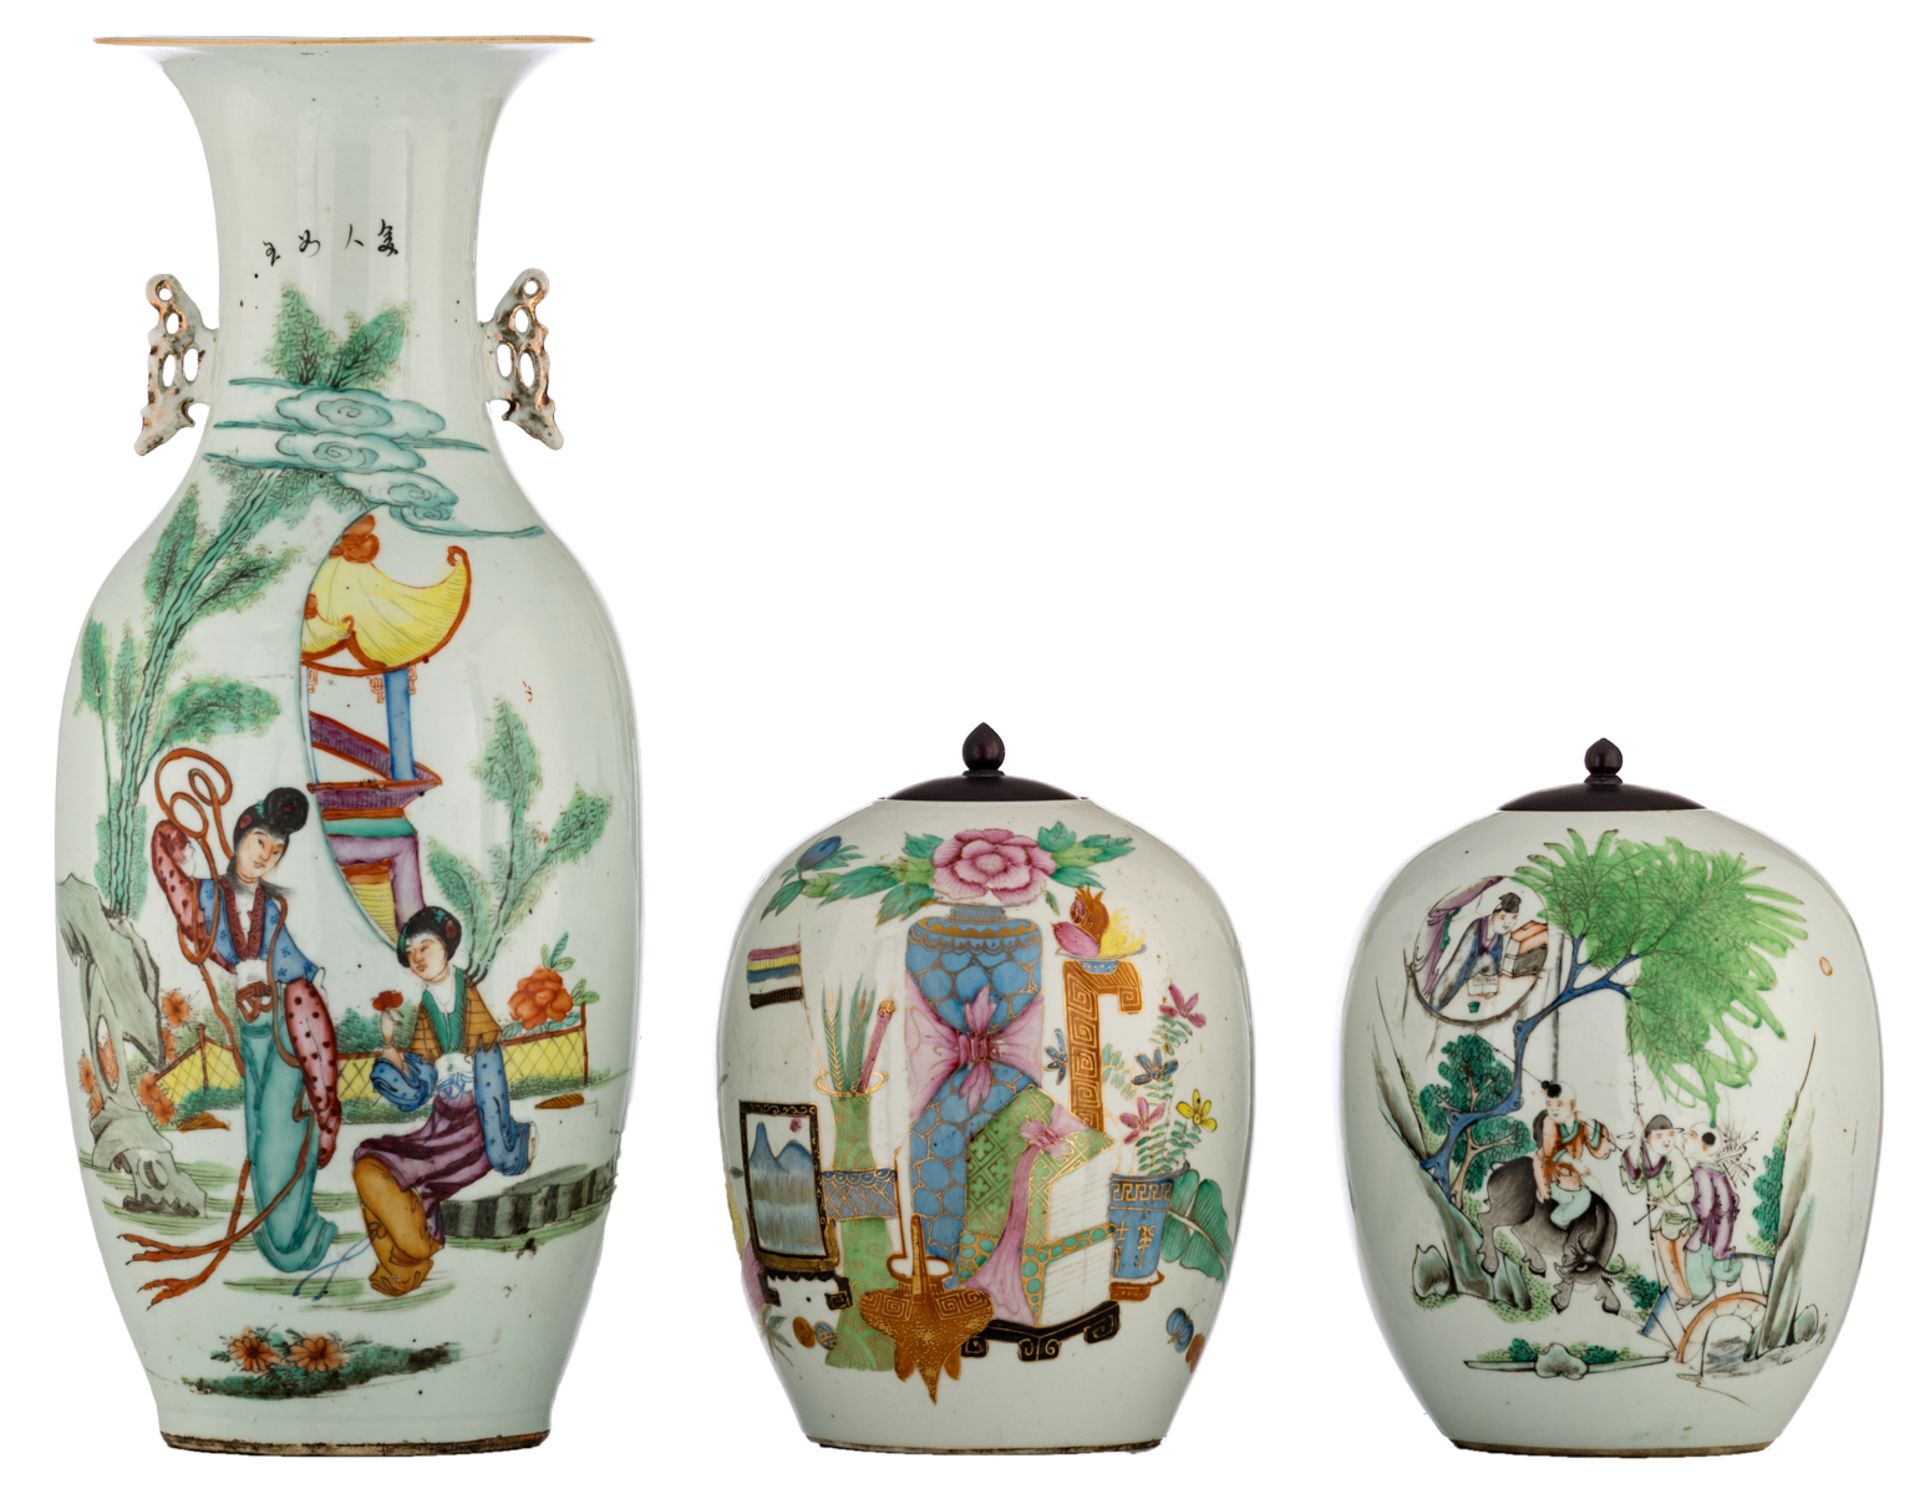 A Chinese famille rose vase, decorated with a gallant garden scene and calligraphic texts; added two